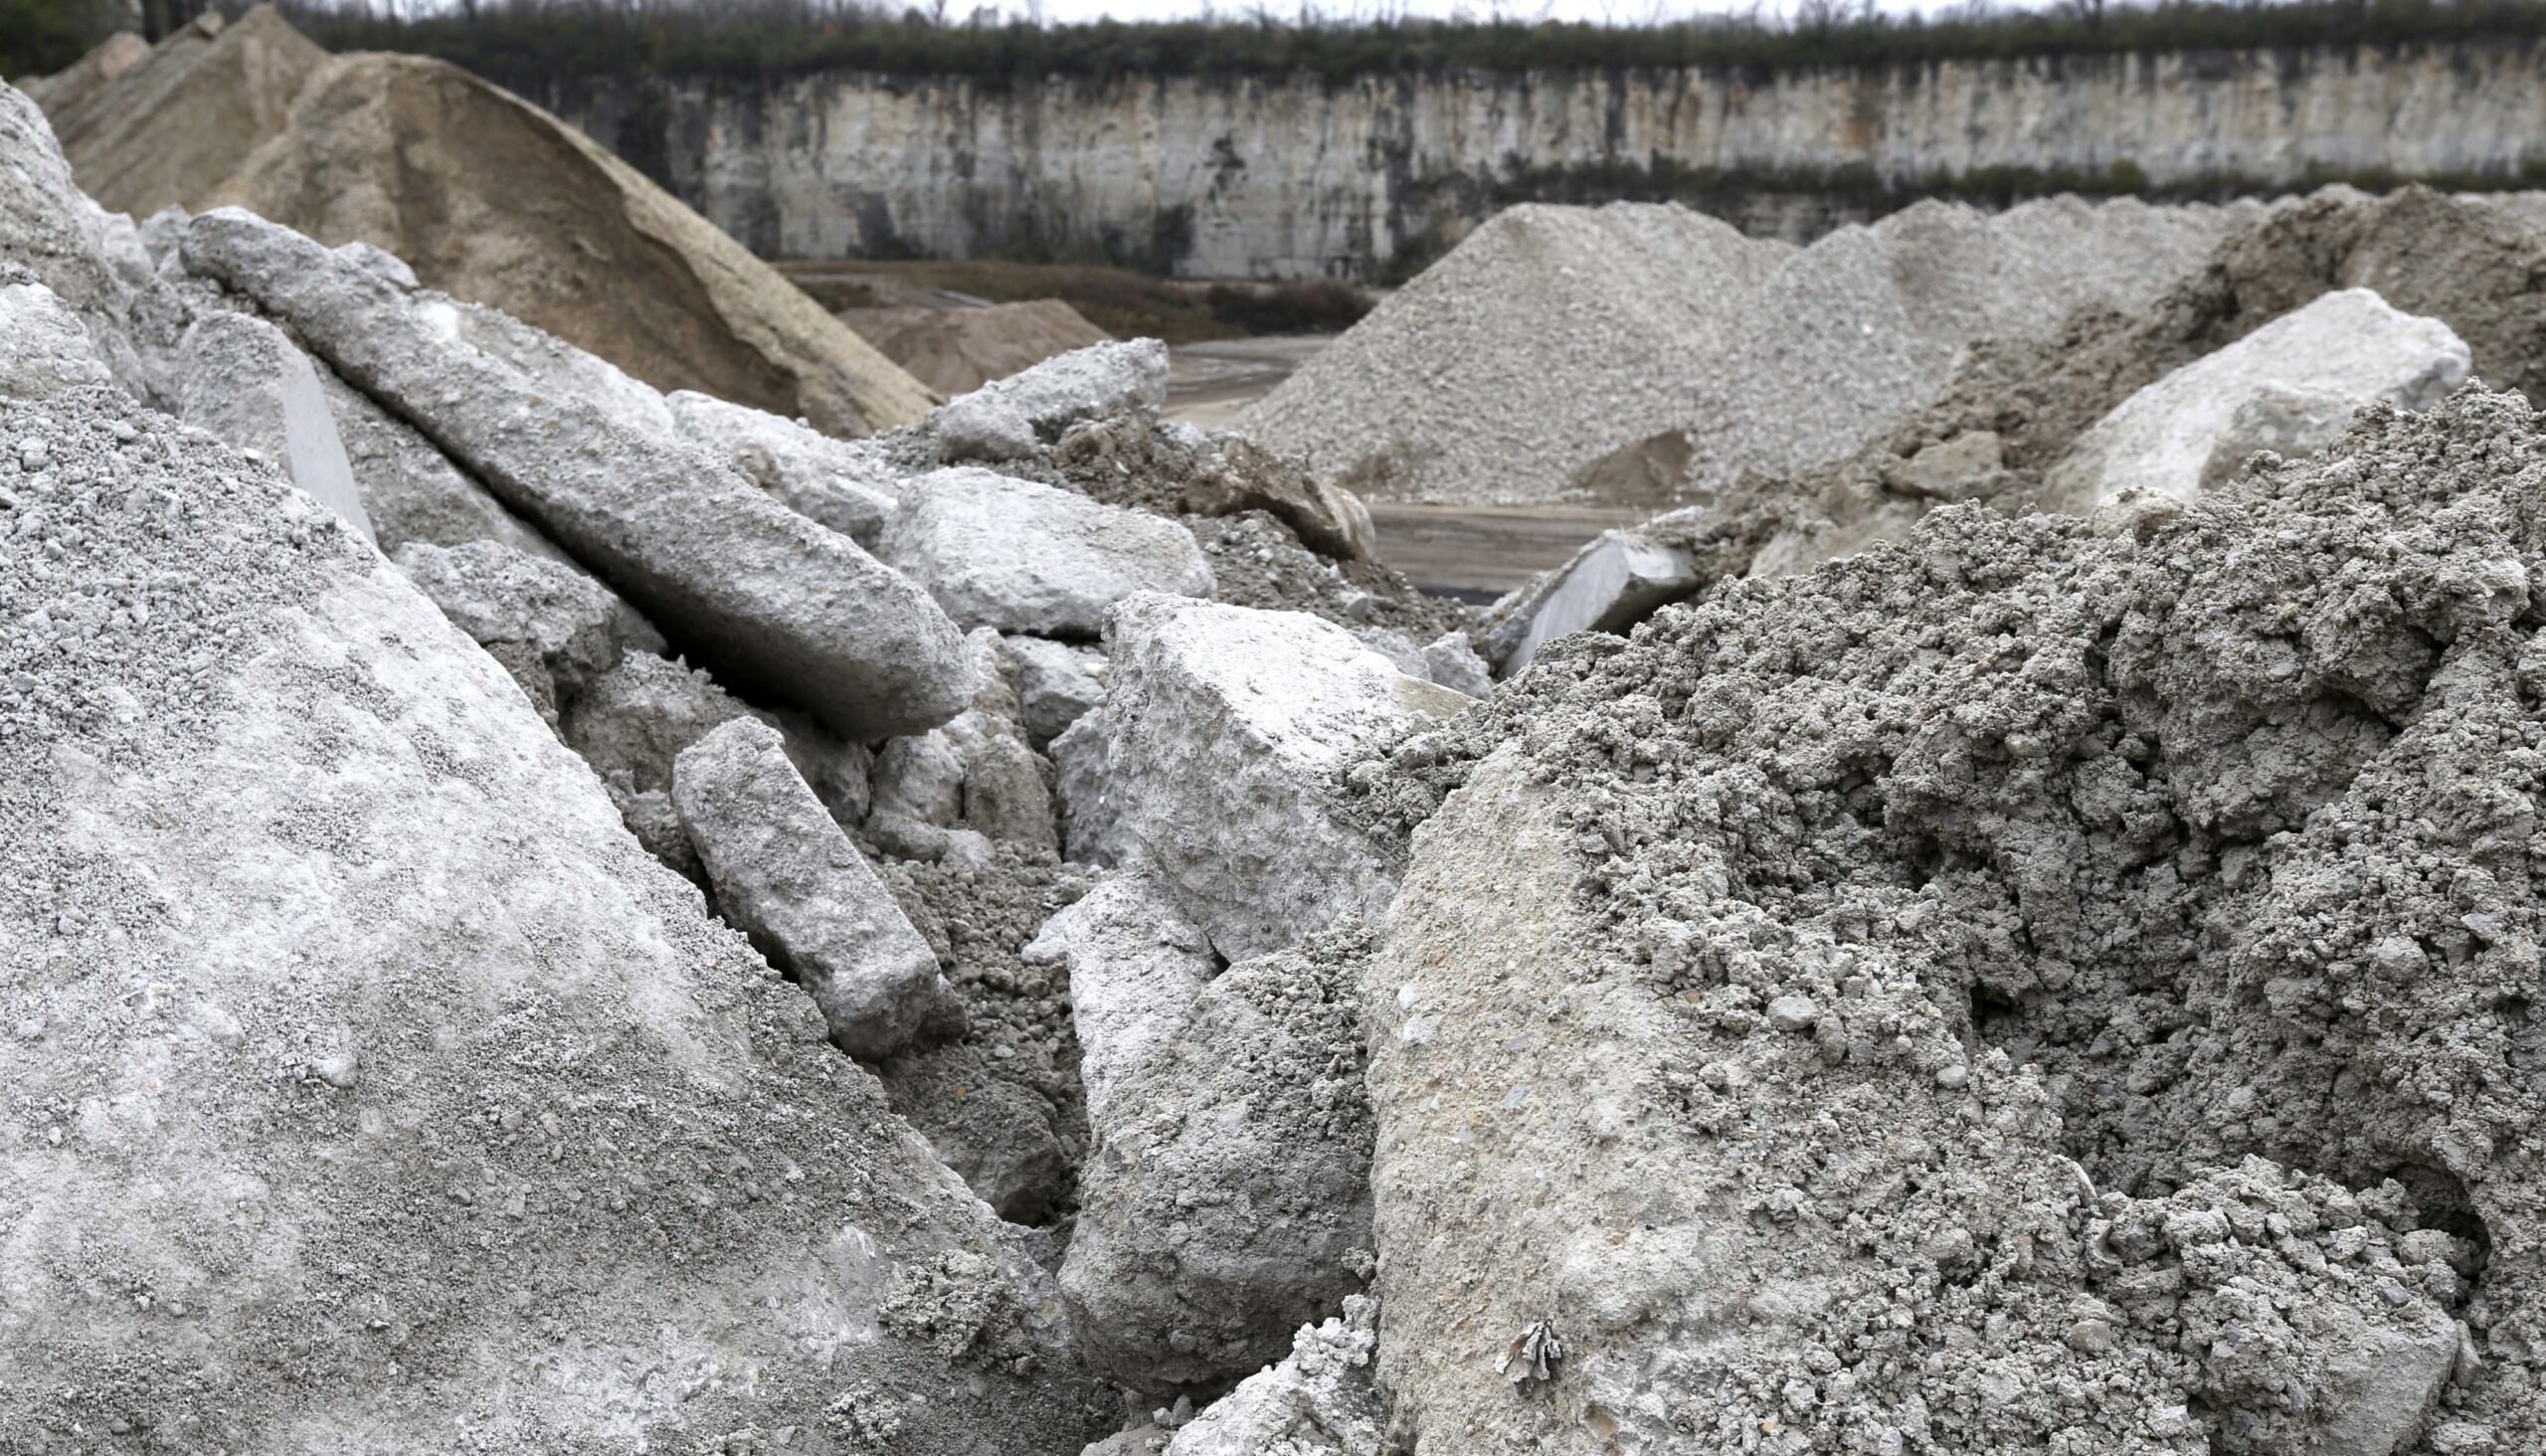 slabs of demolition concrete waste in a quarry